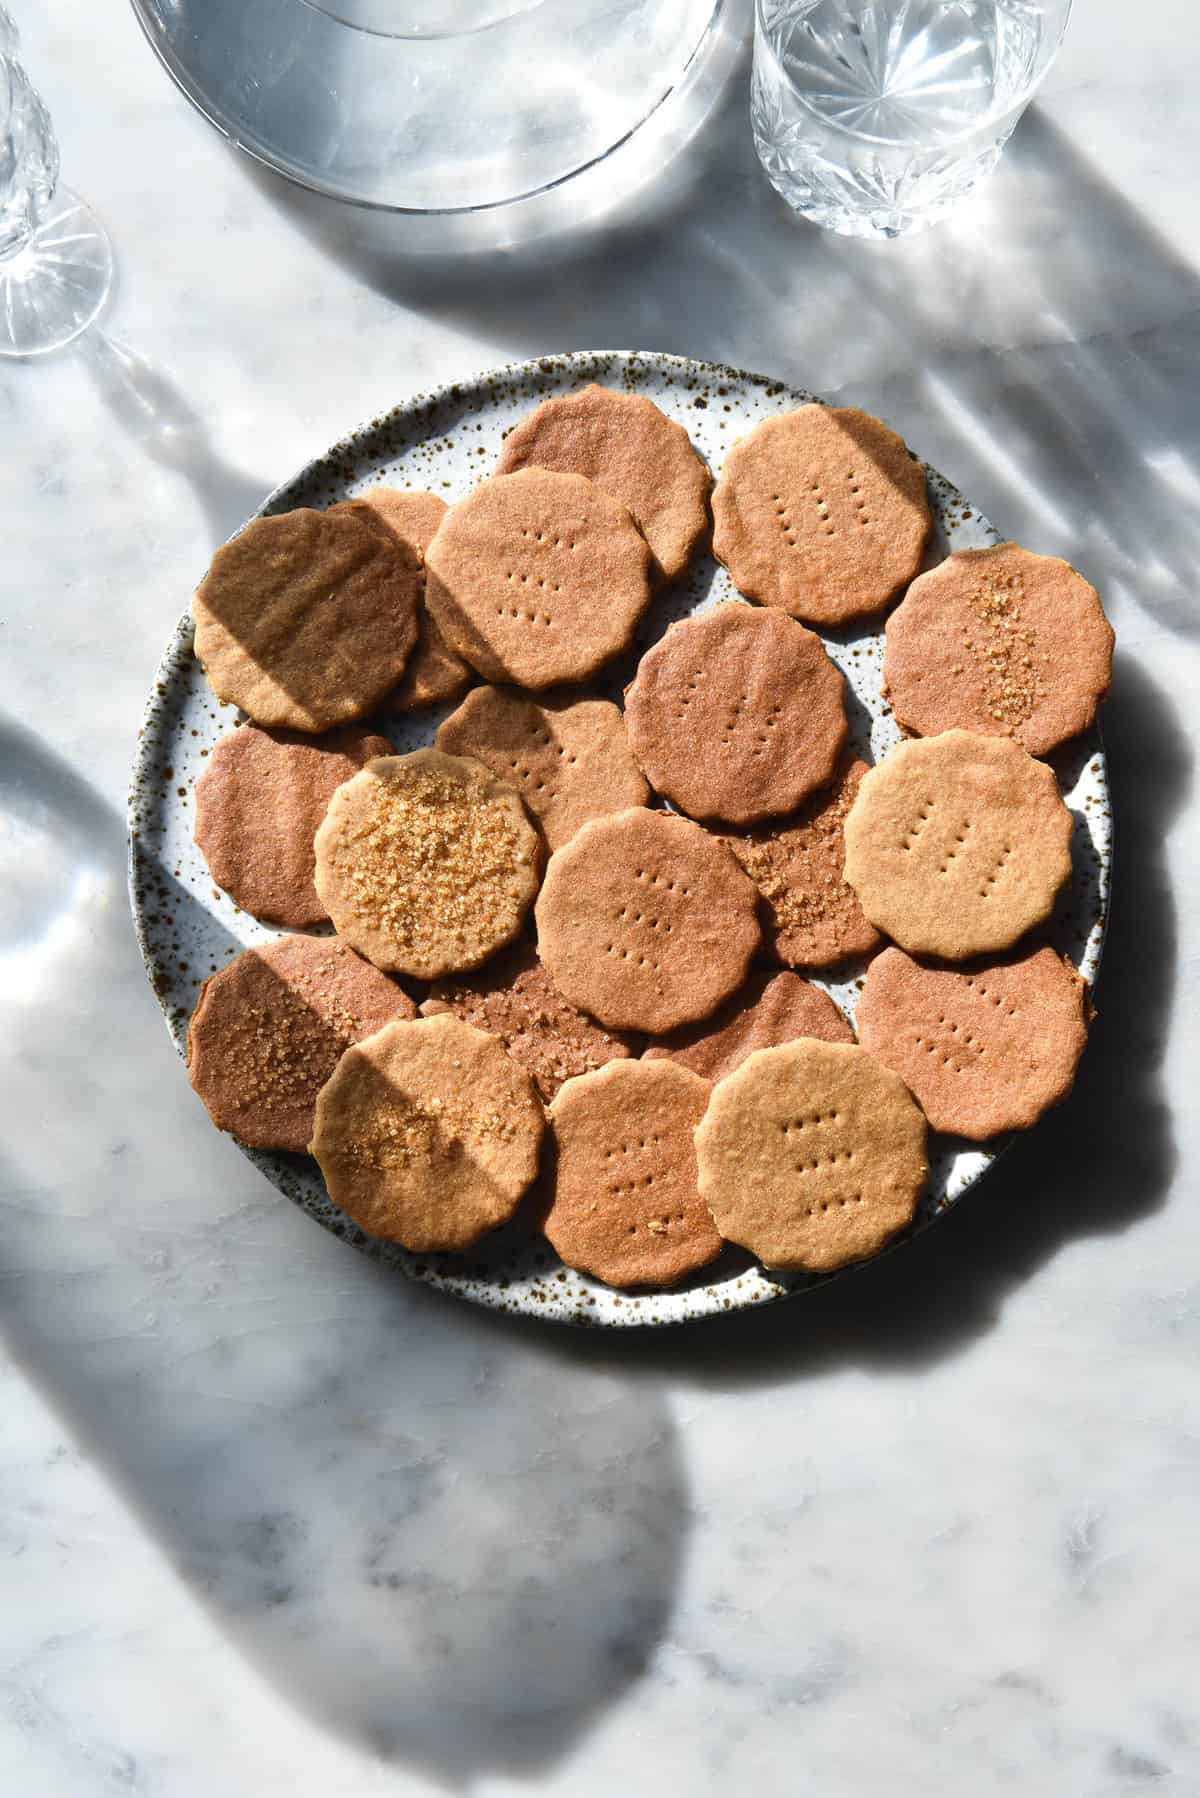 An aerial view of a white speckled ceramic plate topped with vegan gluten free Graham crackers. The crackers sit on a white marble table surrounded by glasses which project light and shadow across the image